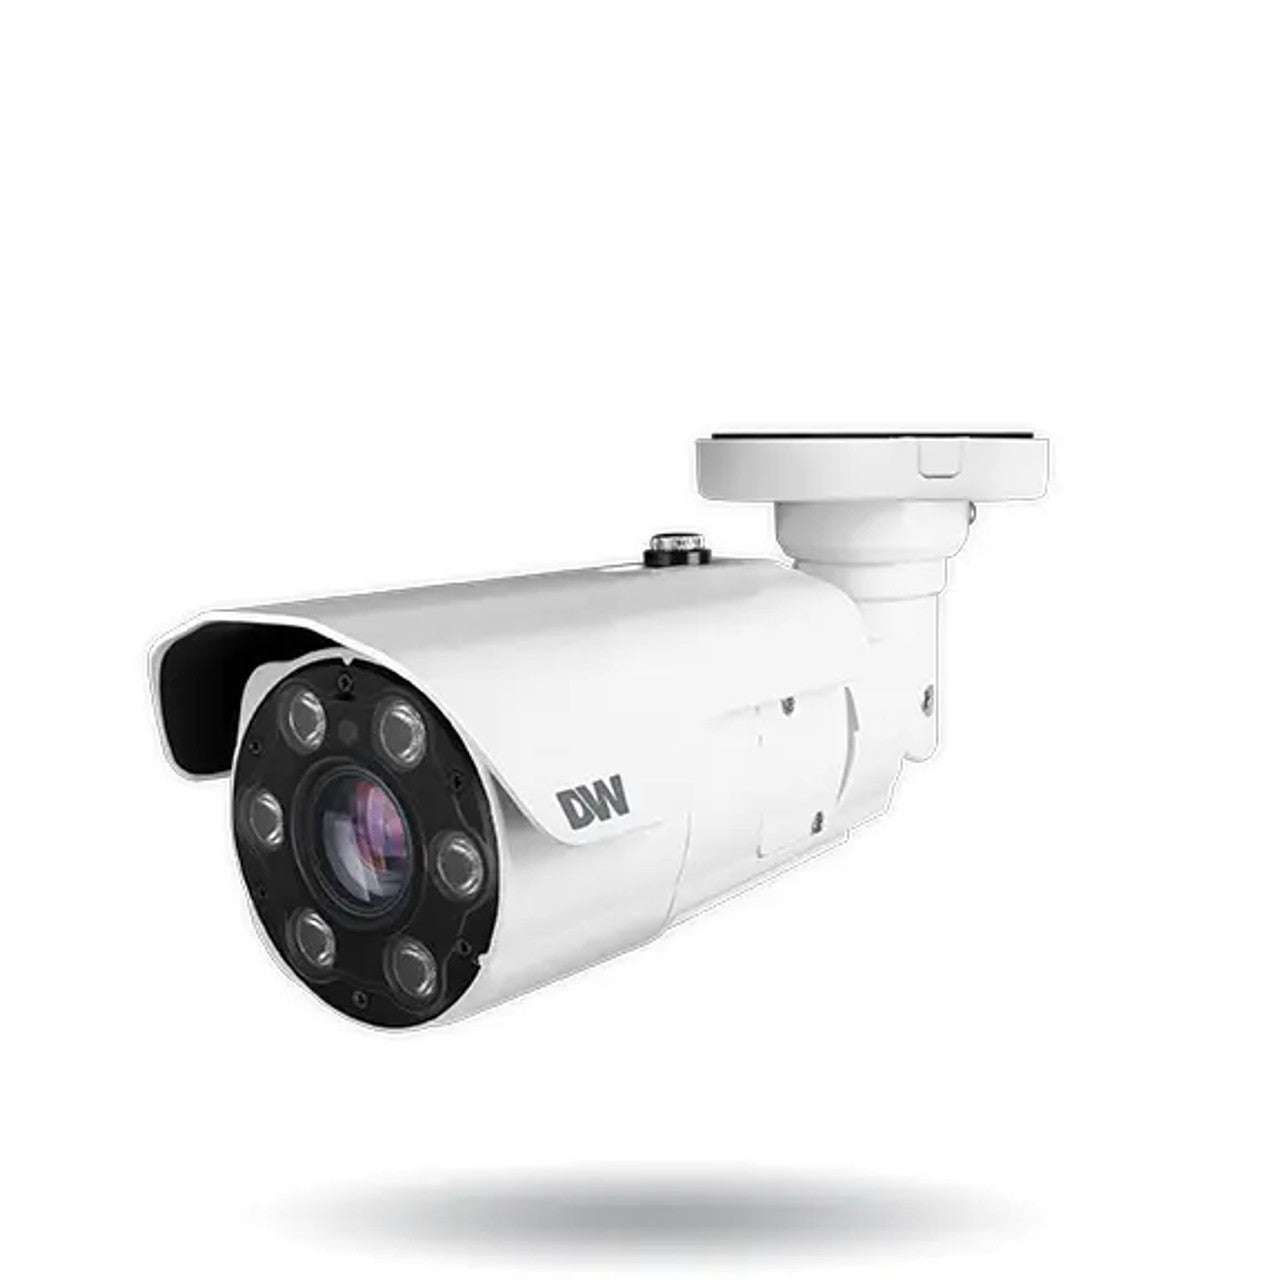 Digital Watchdog DWC-MB48WiATW 8MP 4K Night Vision Outdoor Bullet Network IP Security Camera with IVA